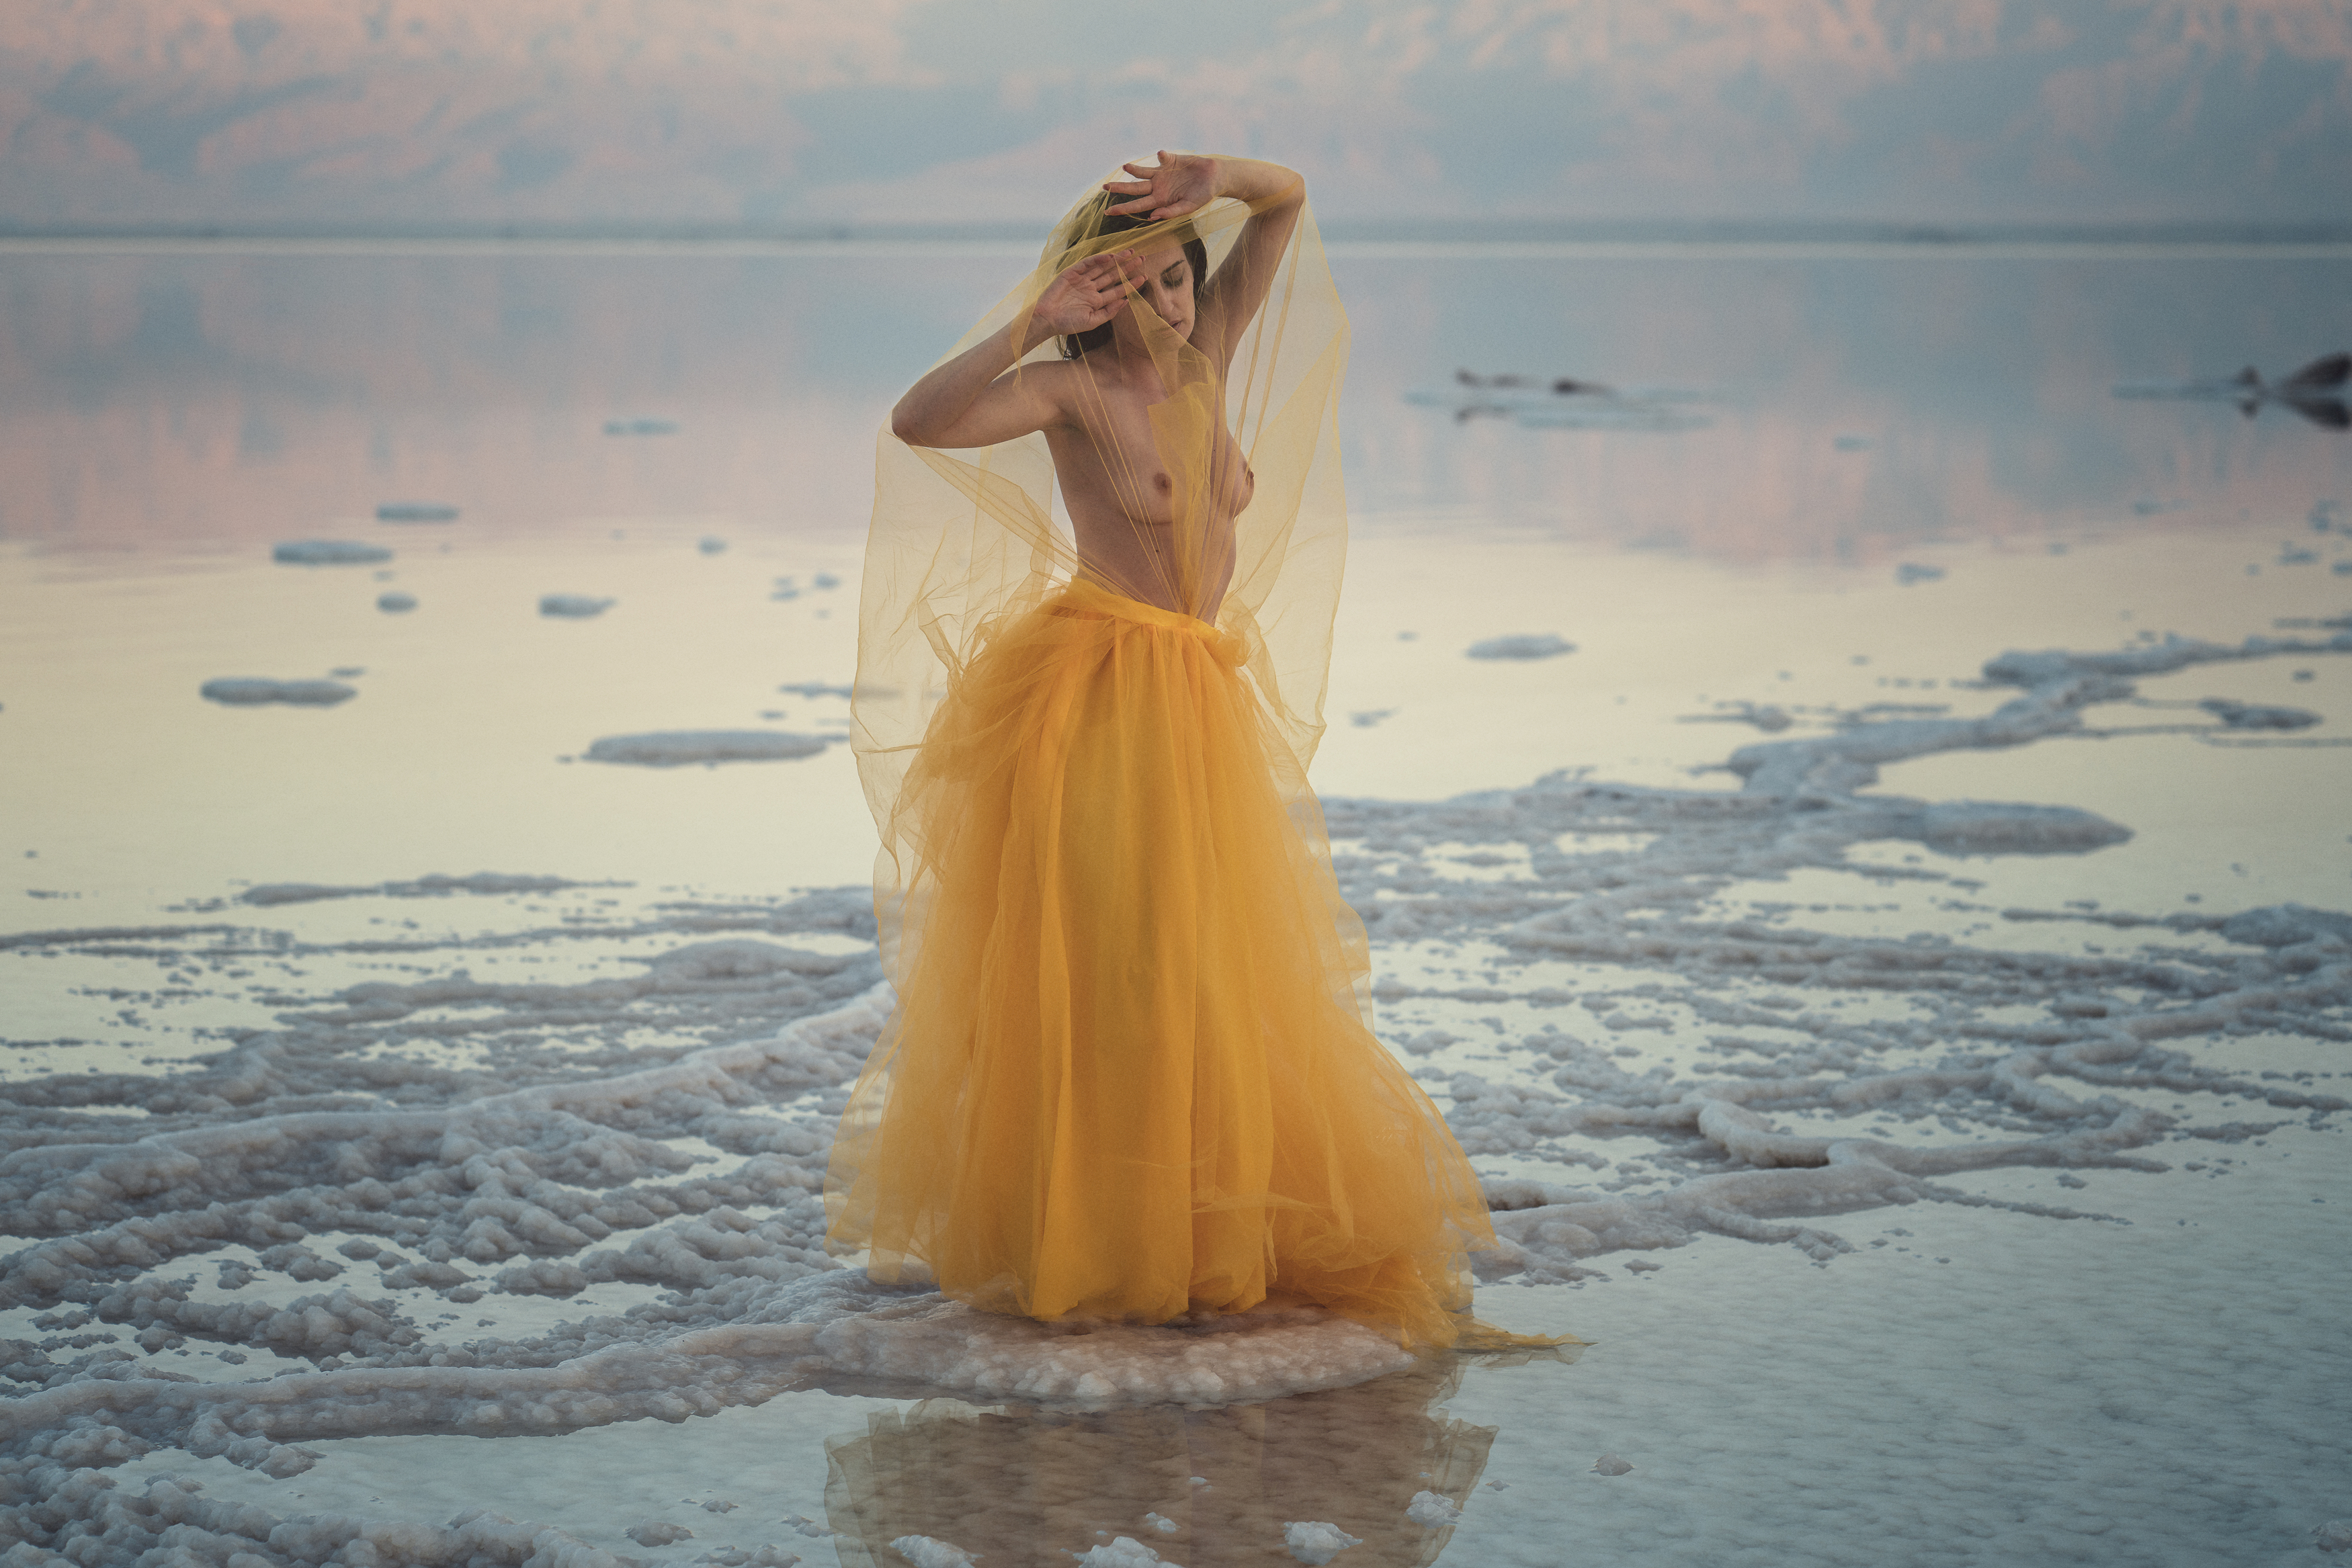 ball gown, beautiful woman, dead sea, desert, dreaminess, elegance, female, femininity, front view, golden hour, grace, individuality, naked, nude, one person, outdoors, pose, reflections, salt, seductive women, sensuality, standing, sunset, veil, water, Alex Tsarfin